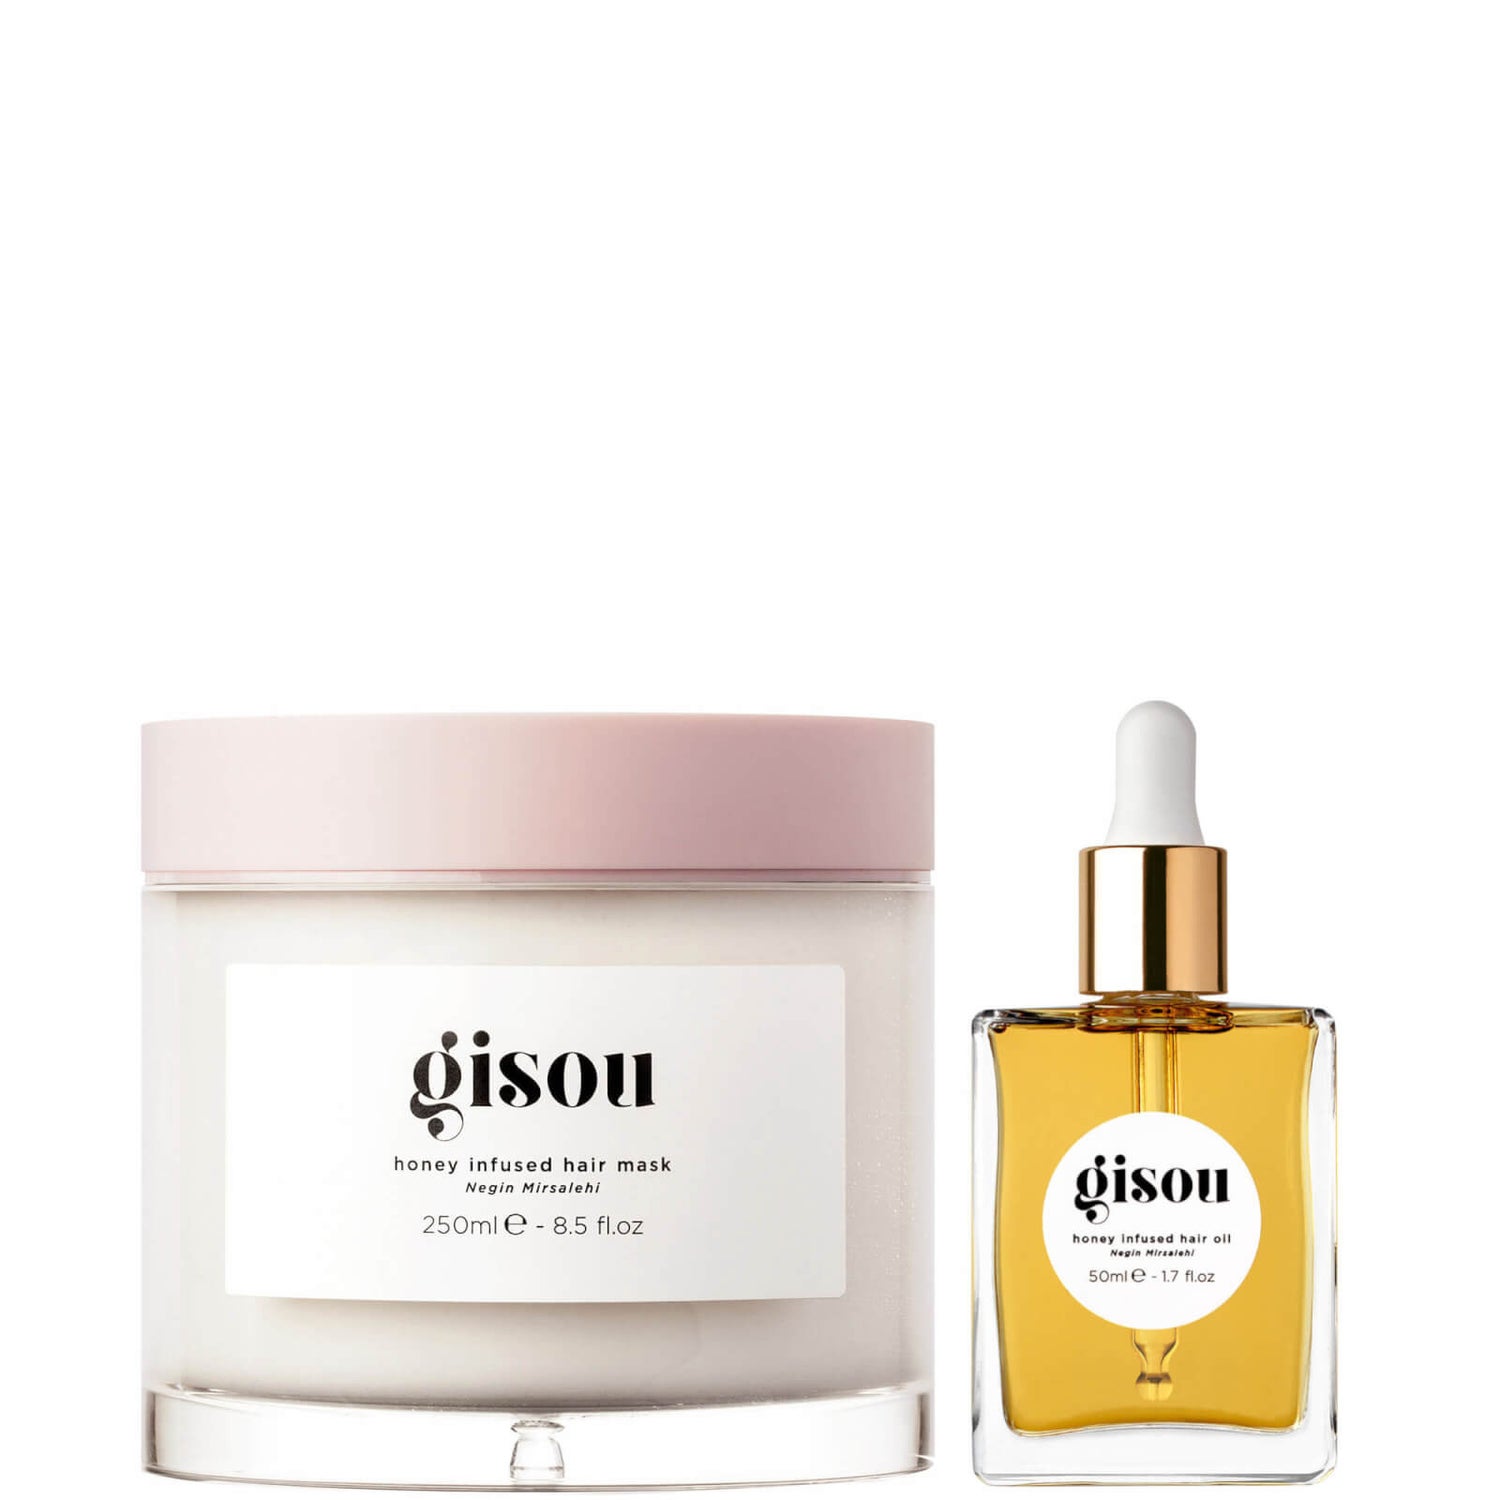 Gisou Honey Infused Hair Mask and Hair Oil Duo